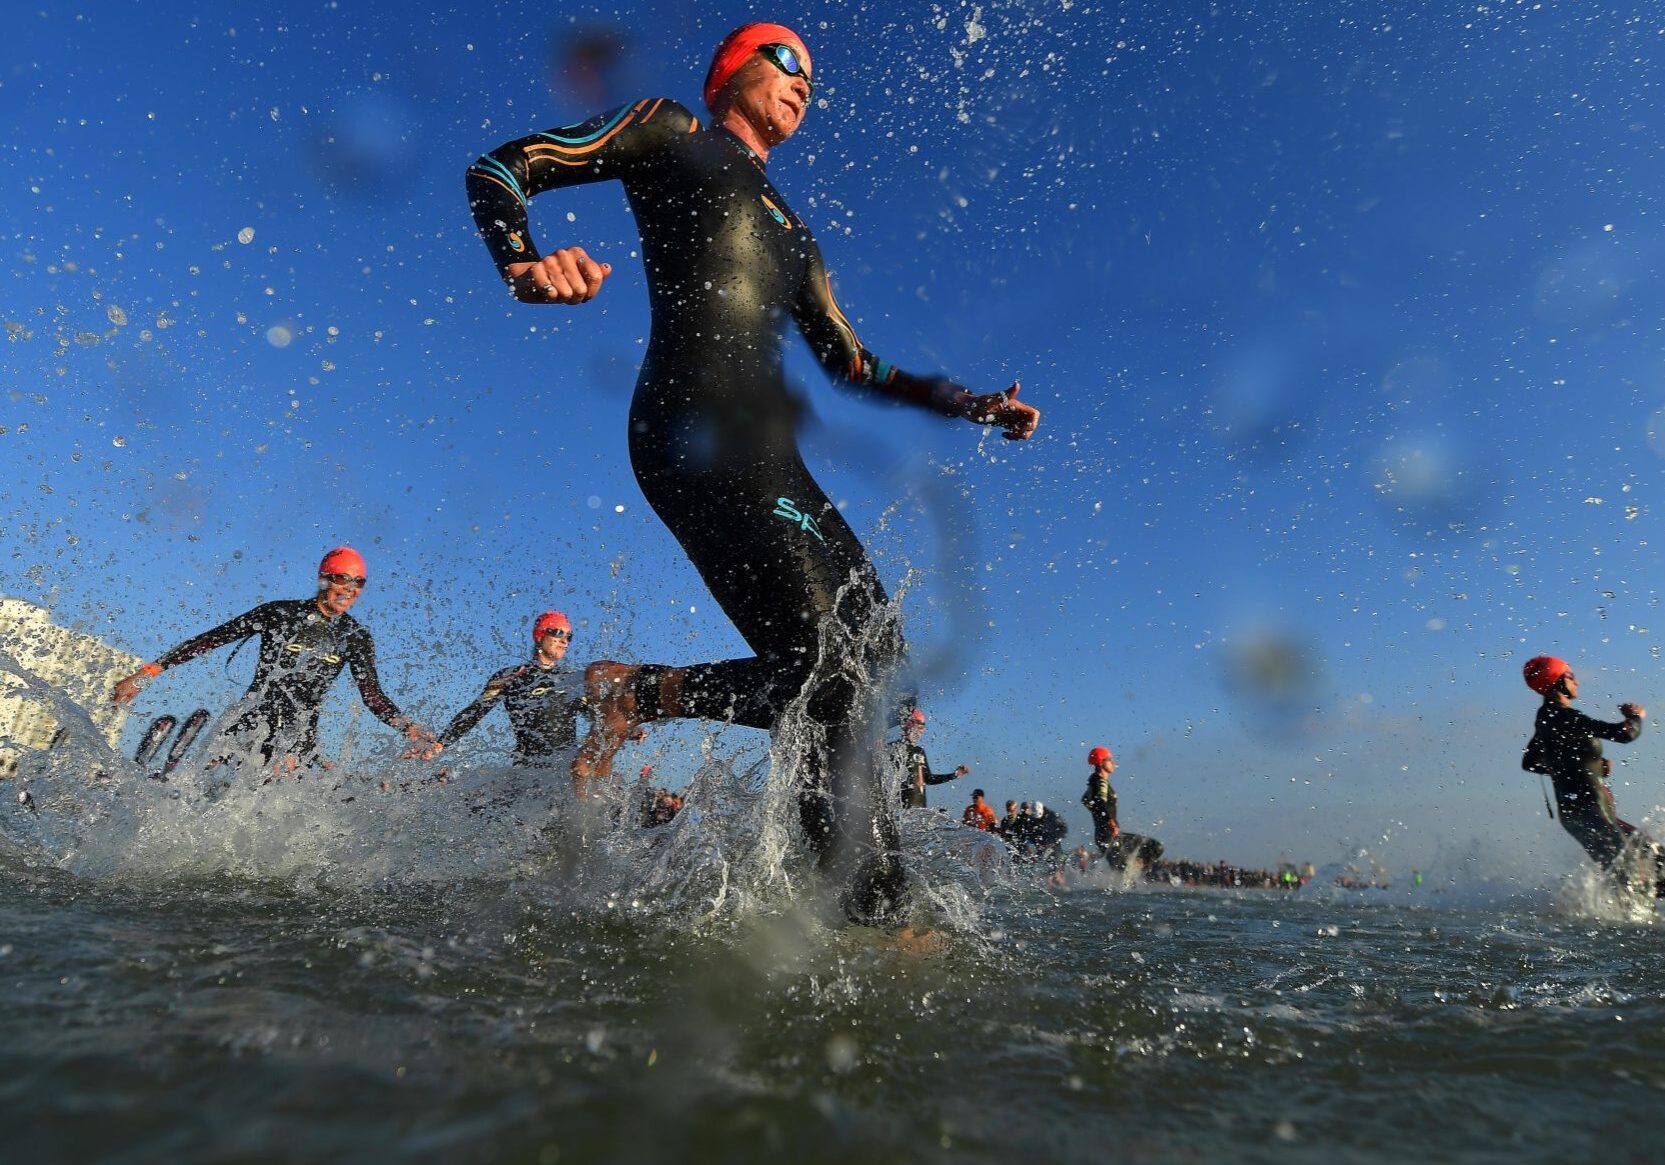 PORT ELIZABETH - SEPTEMBER 1:  General view of Age Group Athletes entering the water for the swim start during the Isuzu IRONMAN 70.3 World Championship Women in Port Elizabeth, South Africa on September 1, 2018. Over 4,500 athletes from over 100 countries will be represented in this years 70.3 World Championship. (Photo by Donald Miralle/Getty Images for IRONMAN).